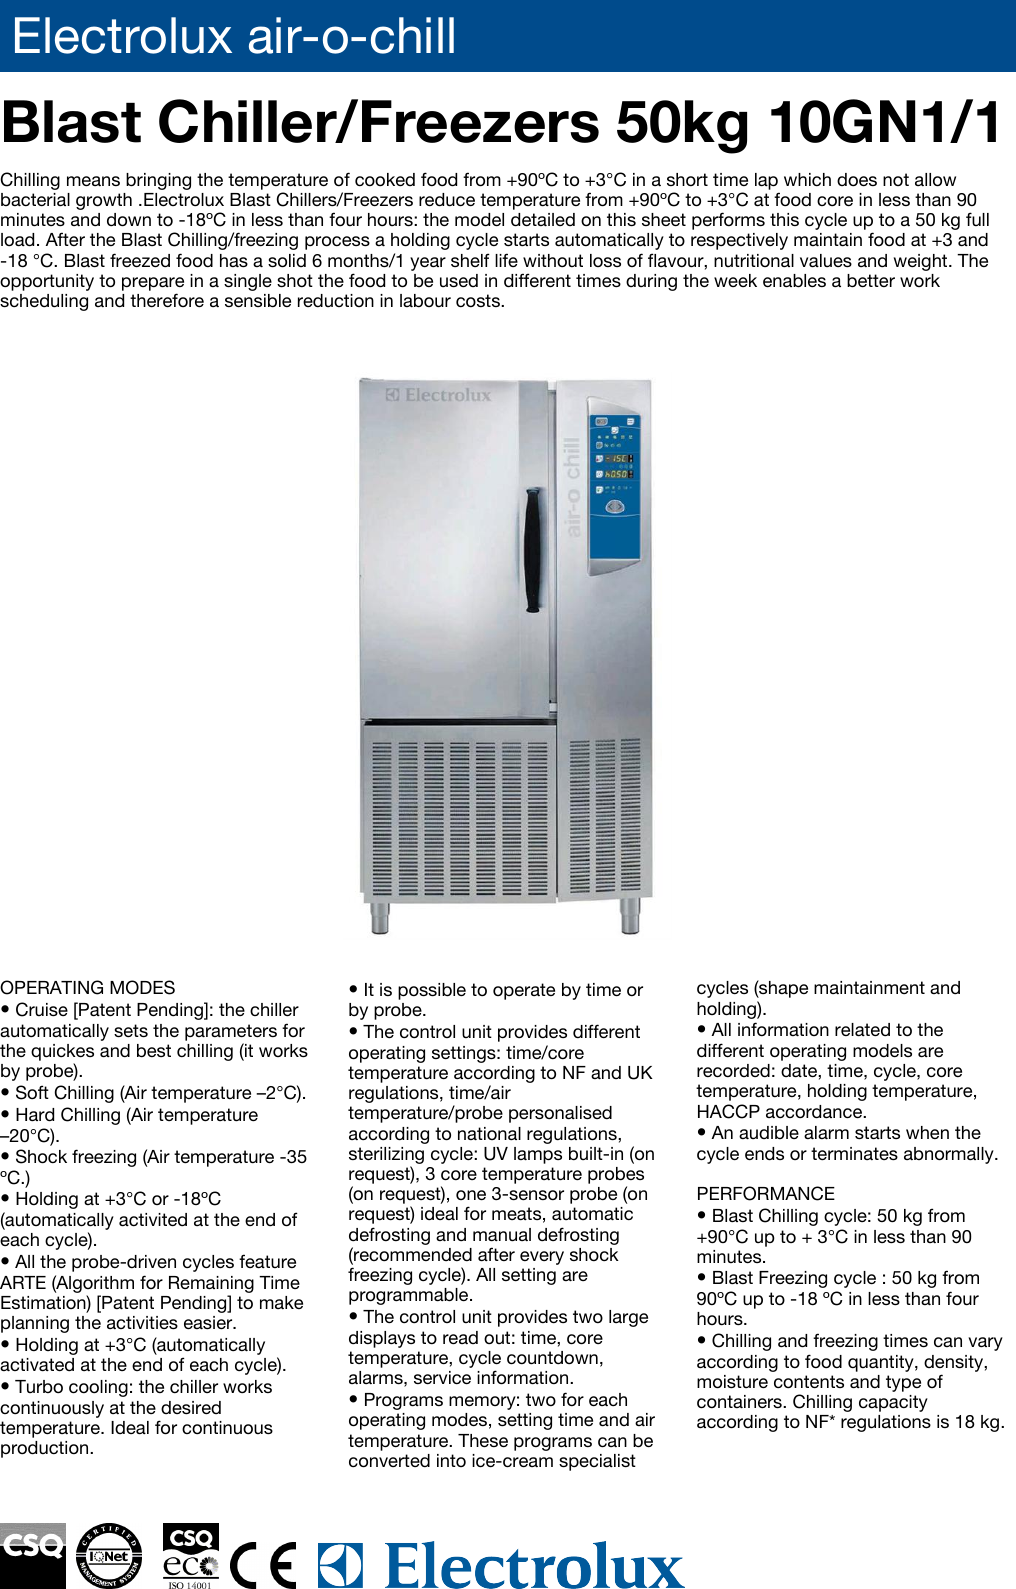 Page 1 of 4 - Electrolux Electrolux-Freezer-Users-Manual- Air-o-chill  Electrolux-freezer-users-manual